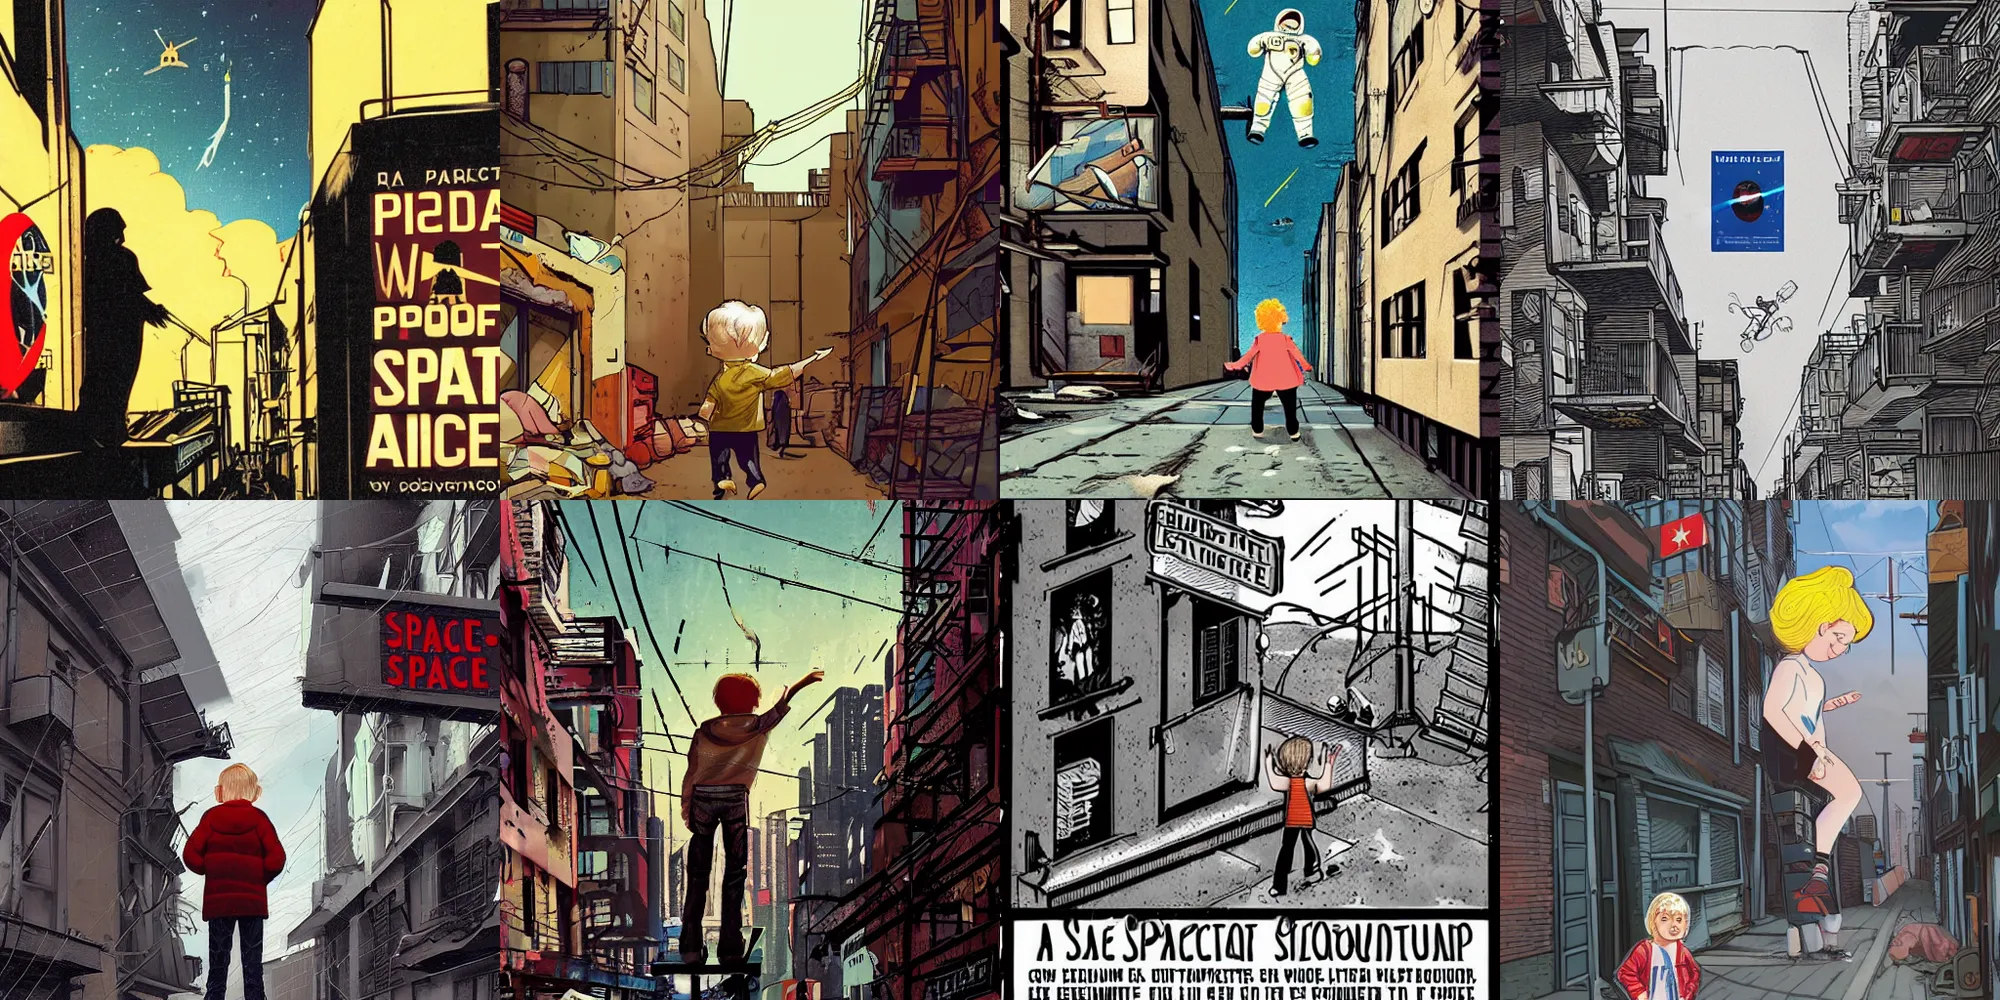 Prompt: a small blonde child staring up at a WPA socialist space program astronaut recruitment billboard in an impoverished tenement cyberpunk violent dirty alley, science fiction, illustration